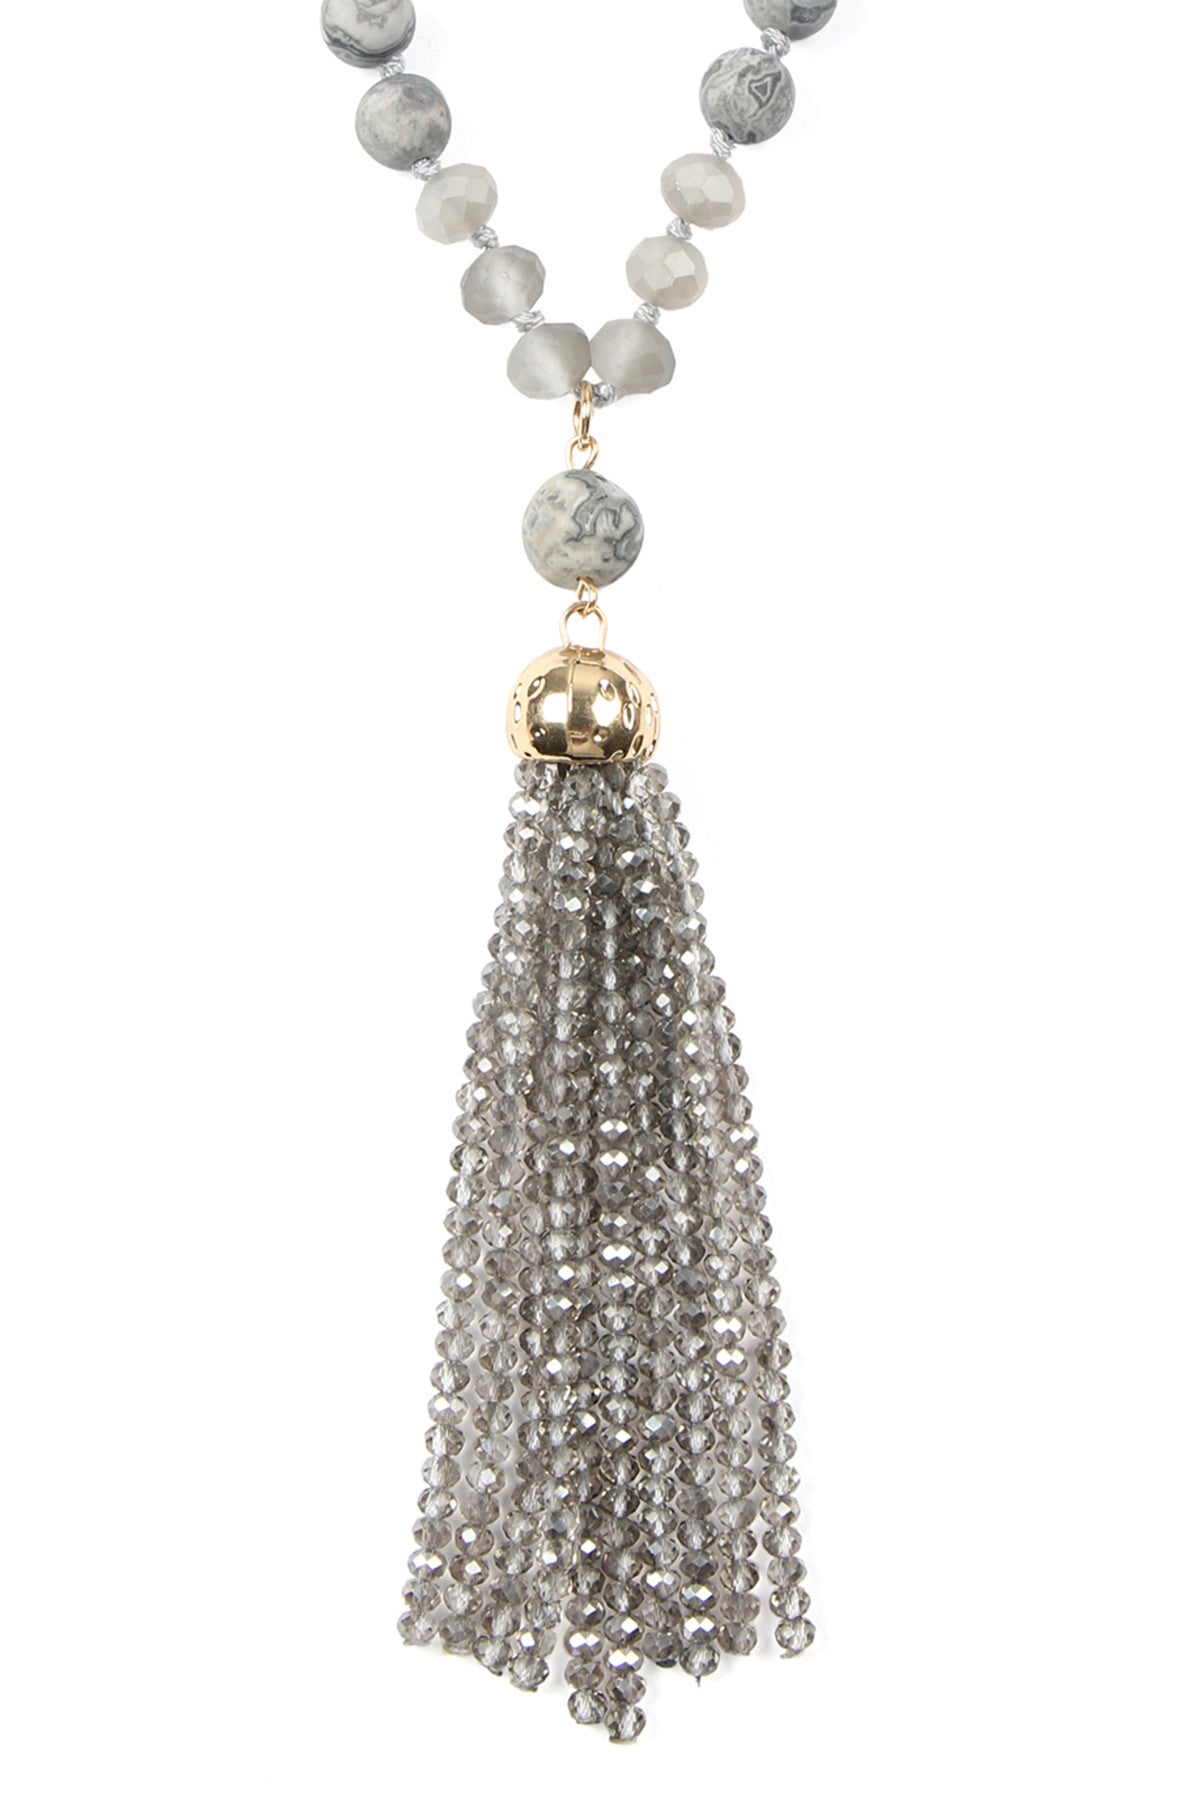 RONDELLE TASSEL PENDANT WITH POLYCORD NECKLACE